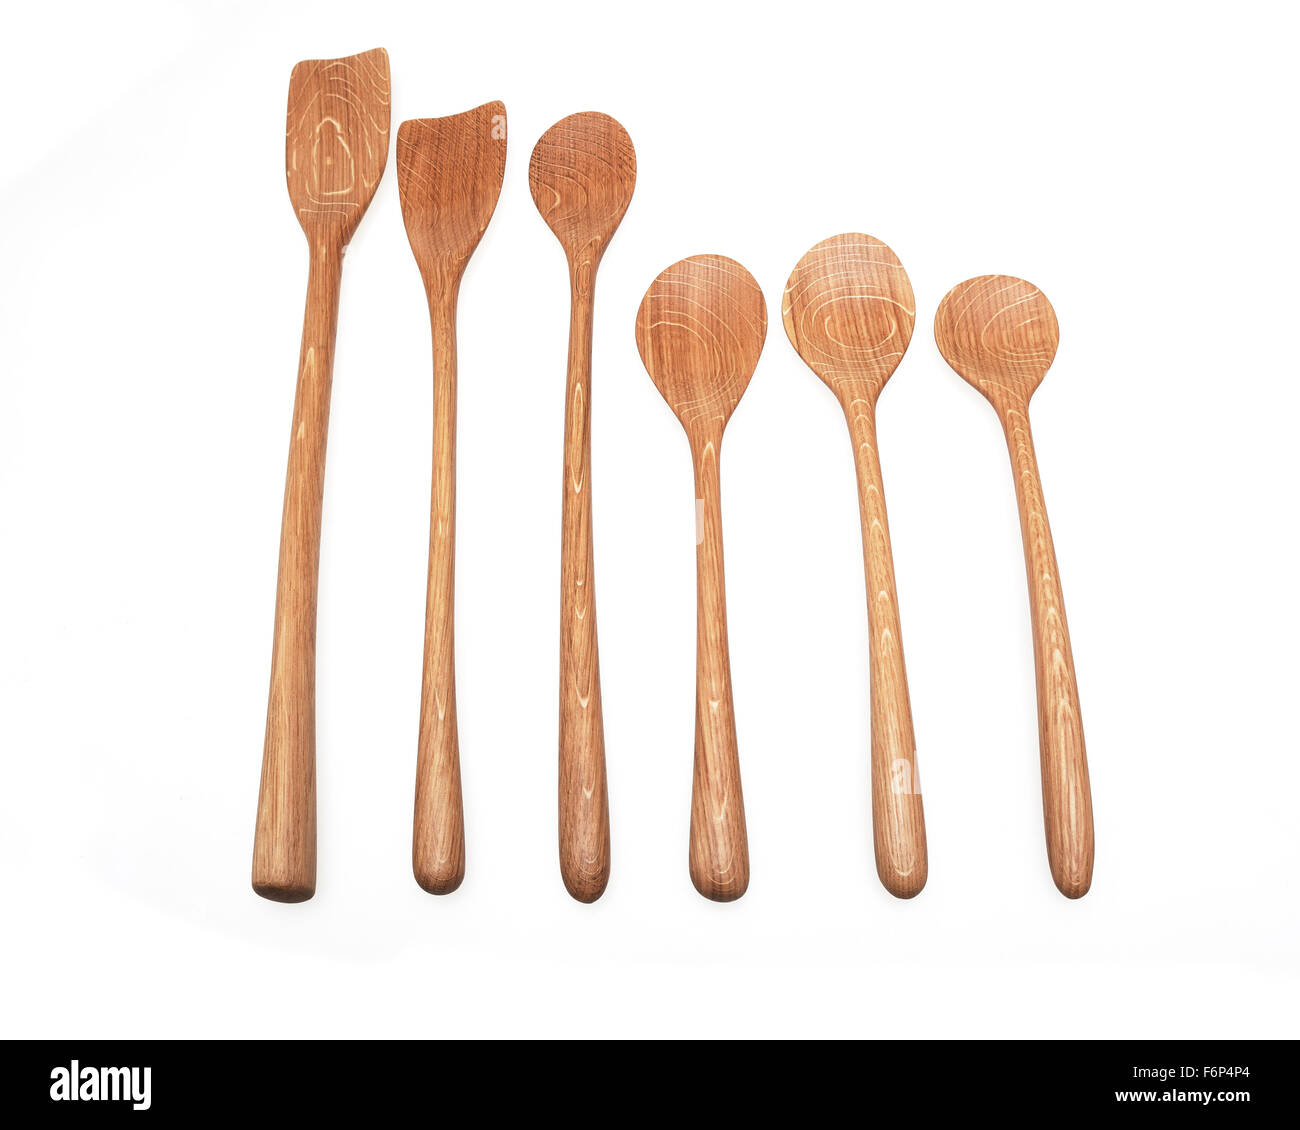 Hand crafted wooden spoons Stock Photo